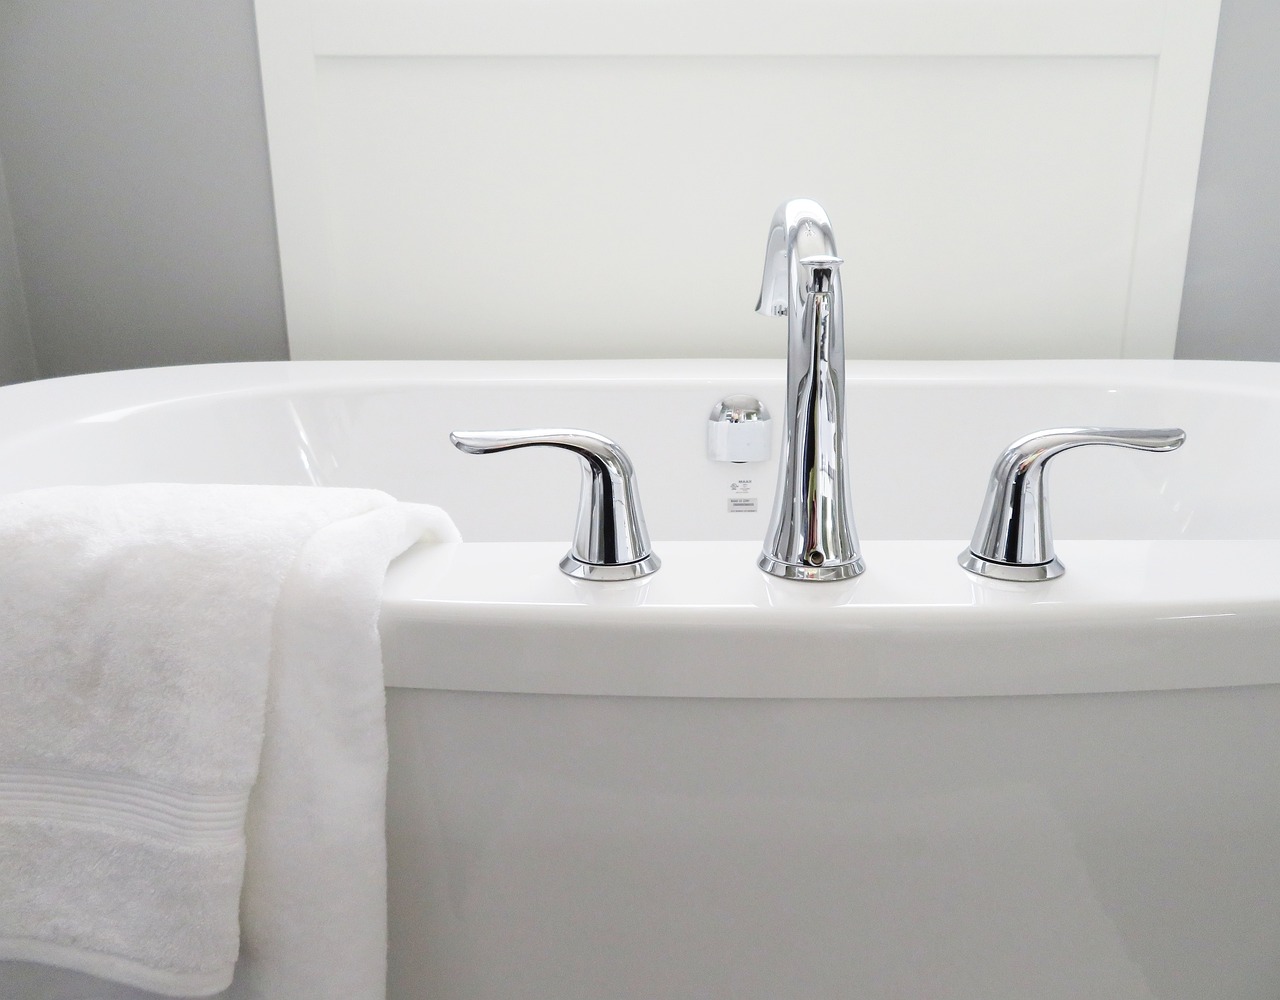 A white towel sat on the edge of a white bathtub with silver taps